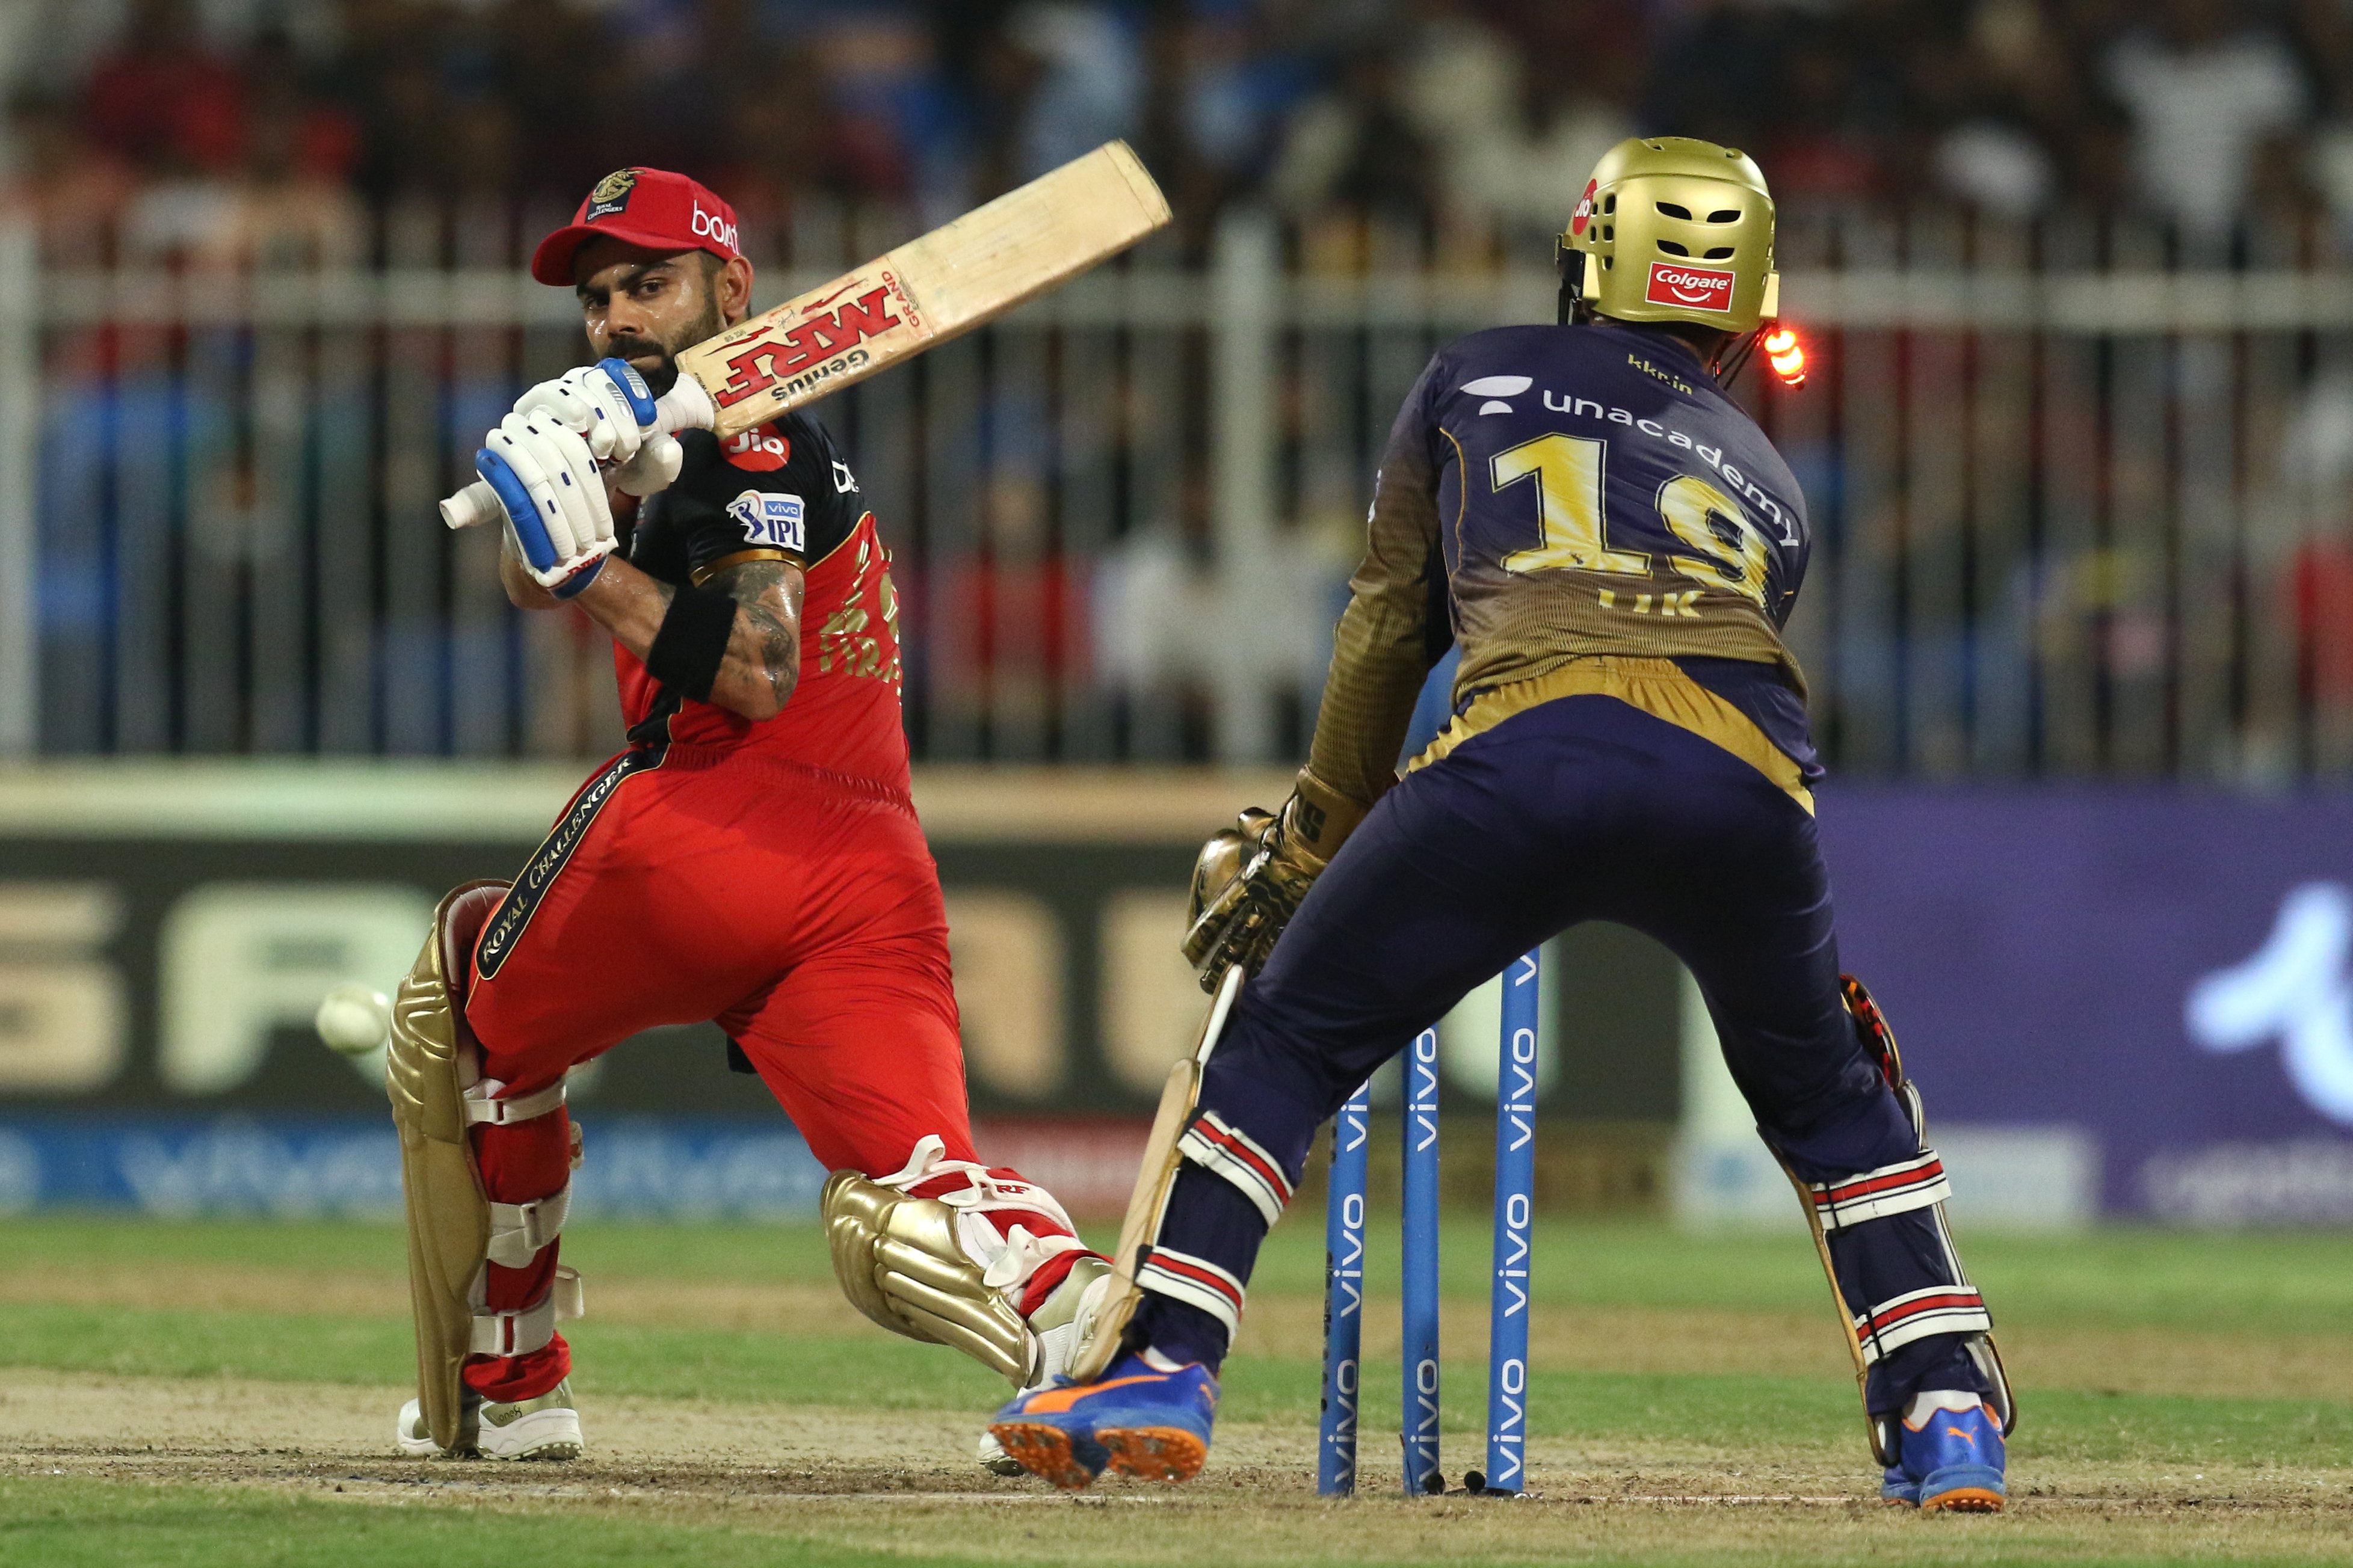 Virat Kohli opens up on future with RCB after knocked out of IPL 2021